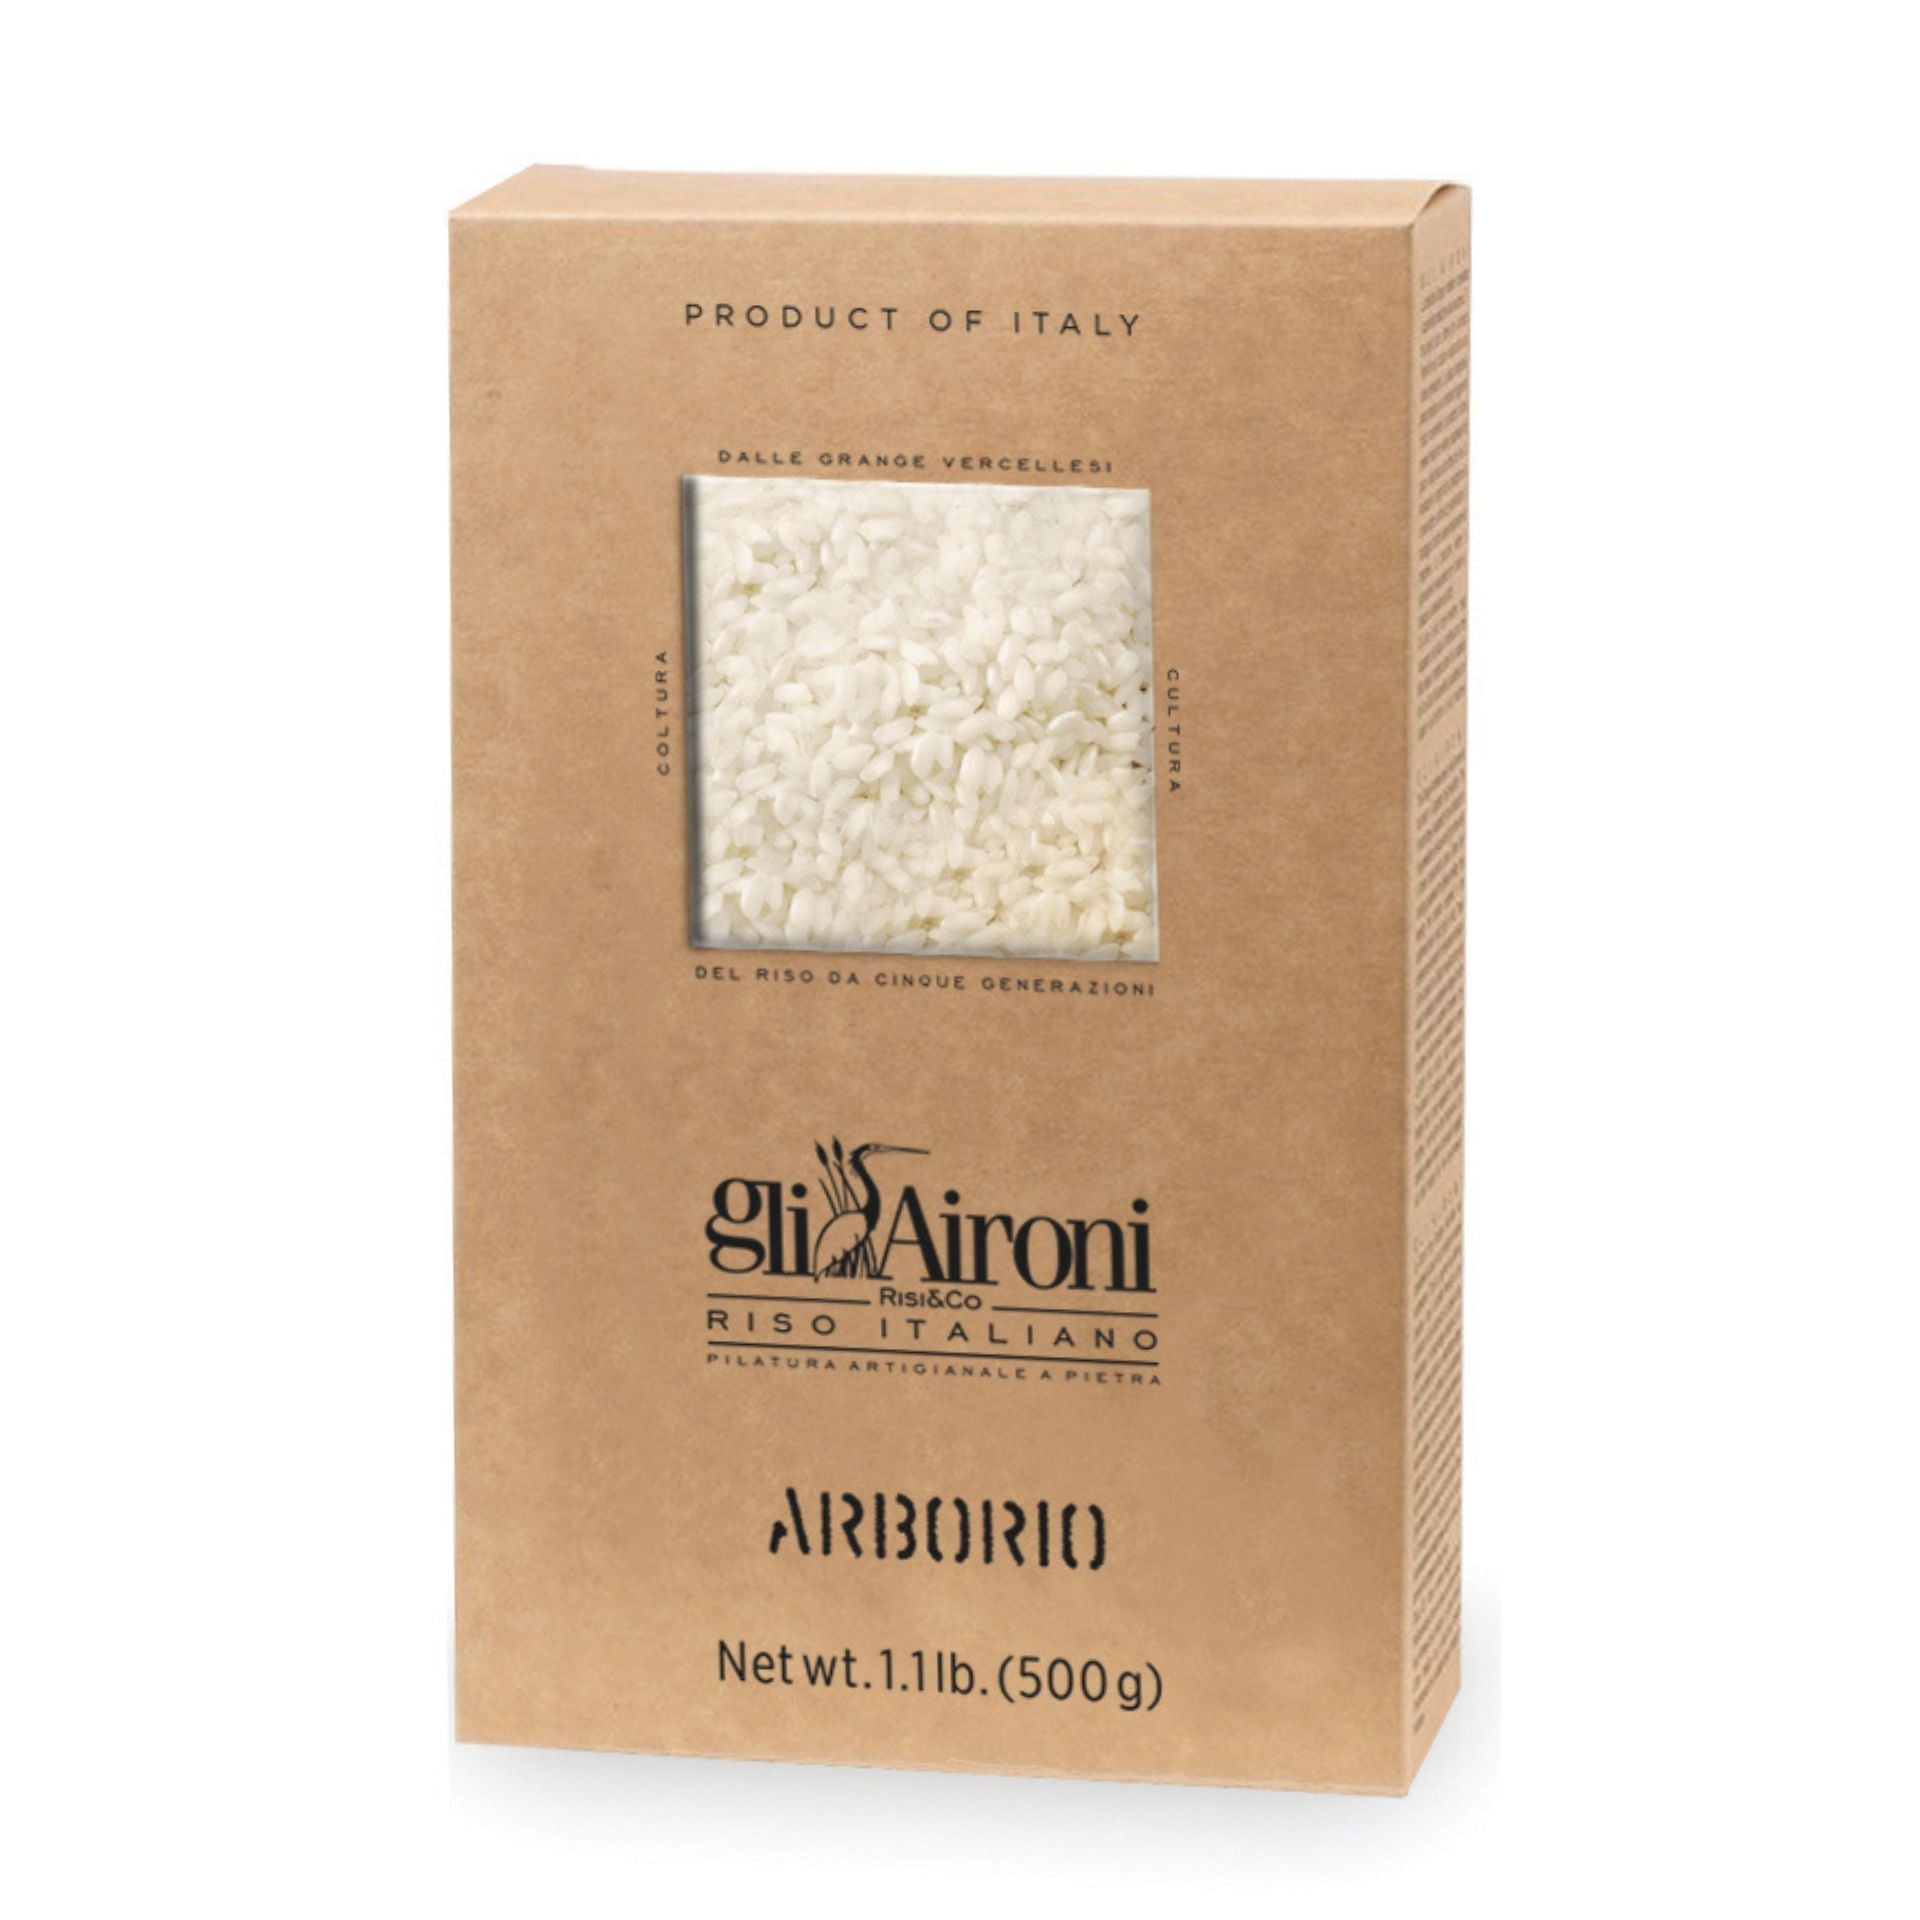 Gli Aironi Arborio Rice 500g (Box)  | Imported and distributed in the UK by Just Gourmet Foods